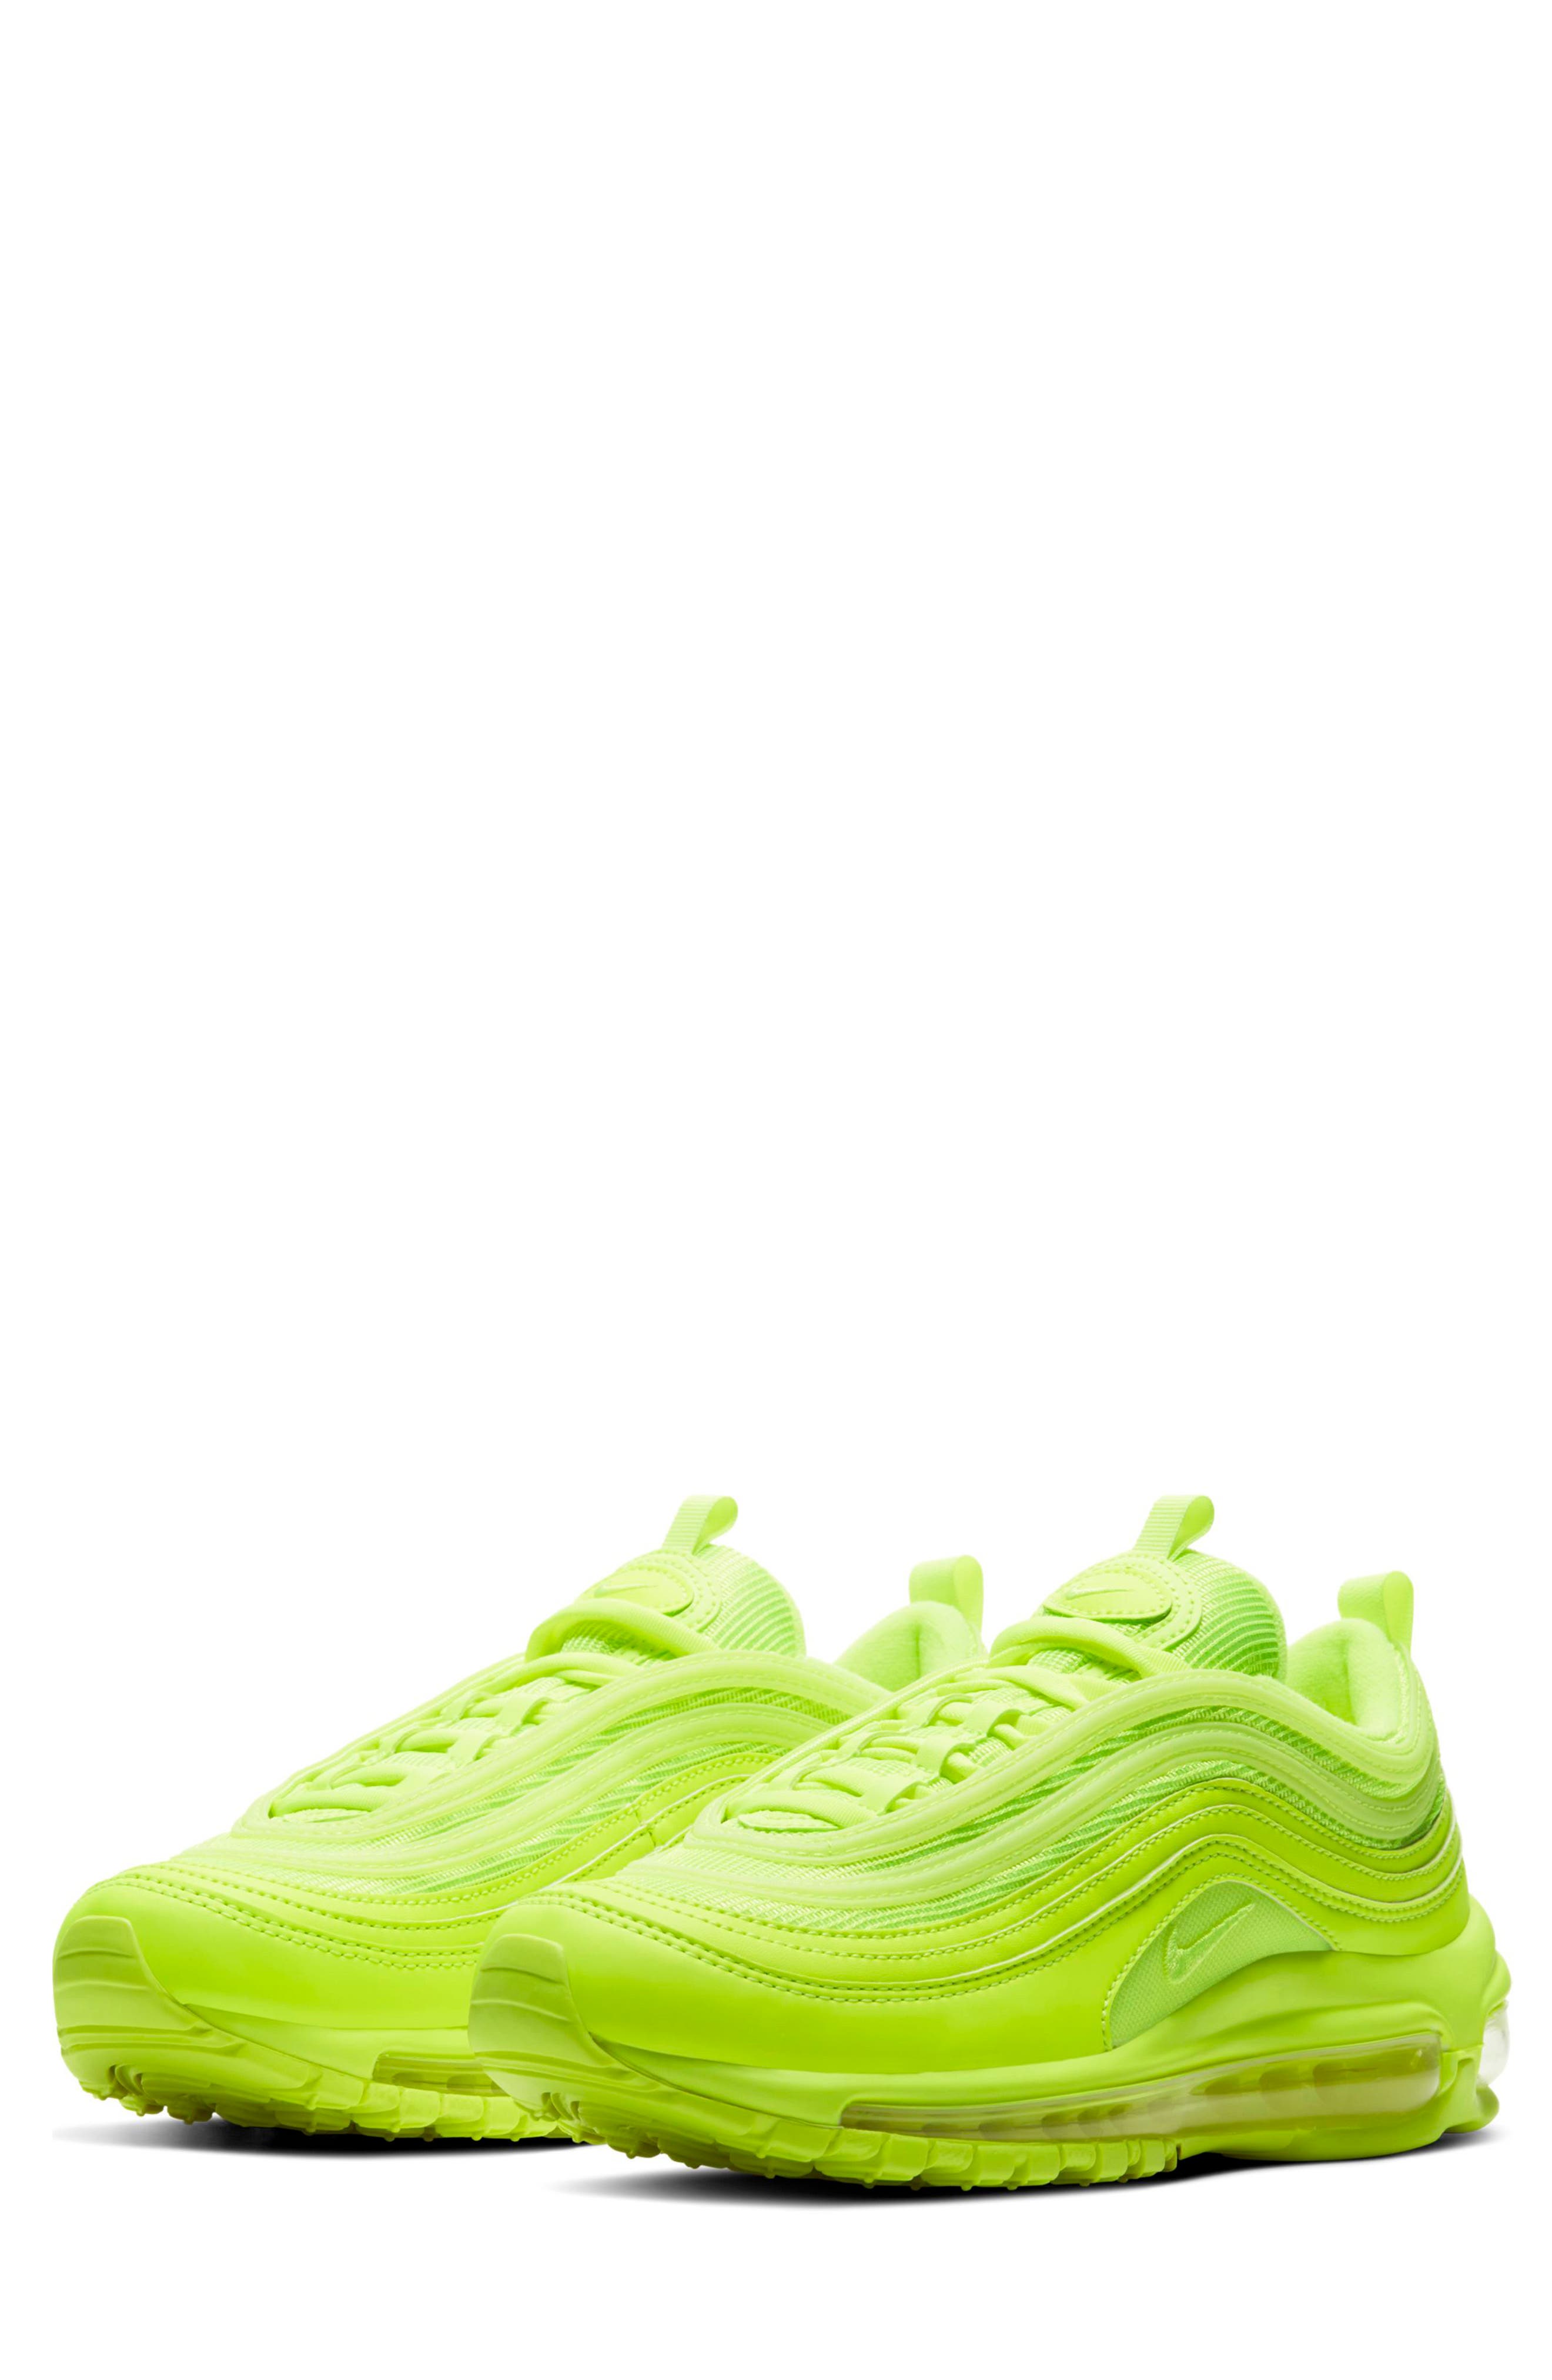 UPC 194274400656 product image for Women's Nike Air Max 97 Sneaker, Size 7 M - Yellow | upcitemdb.com